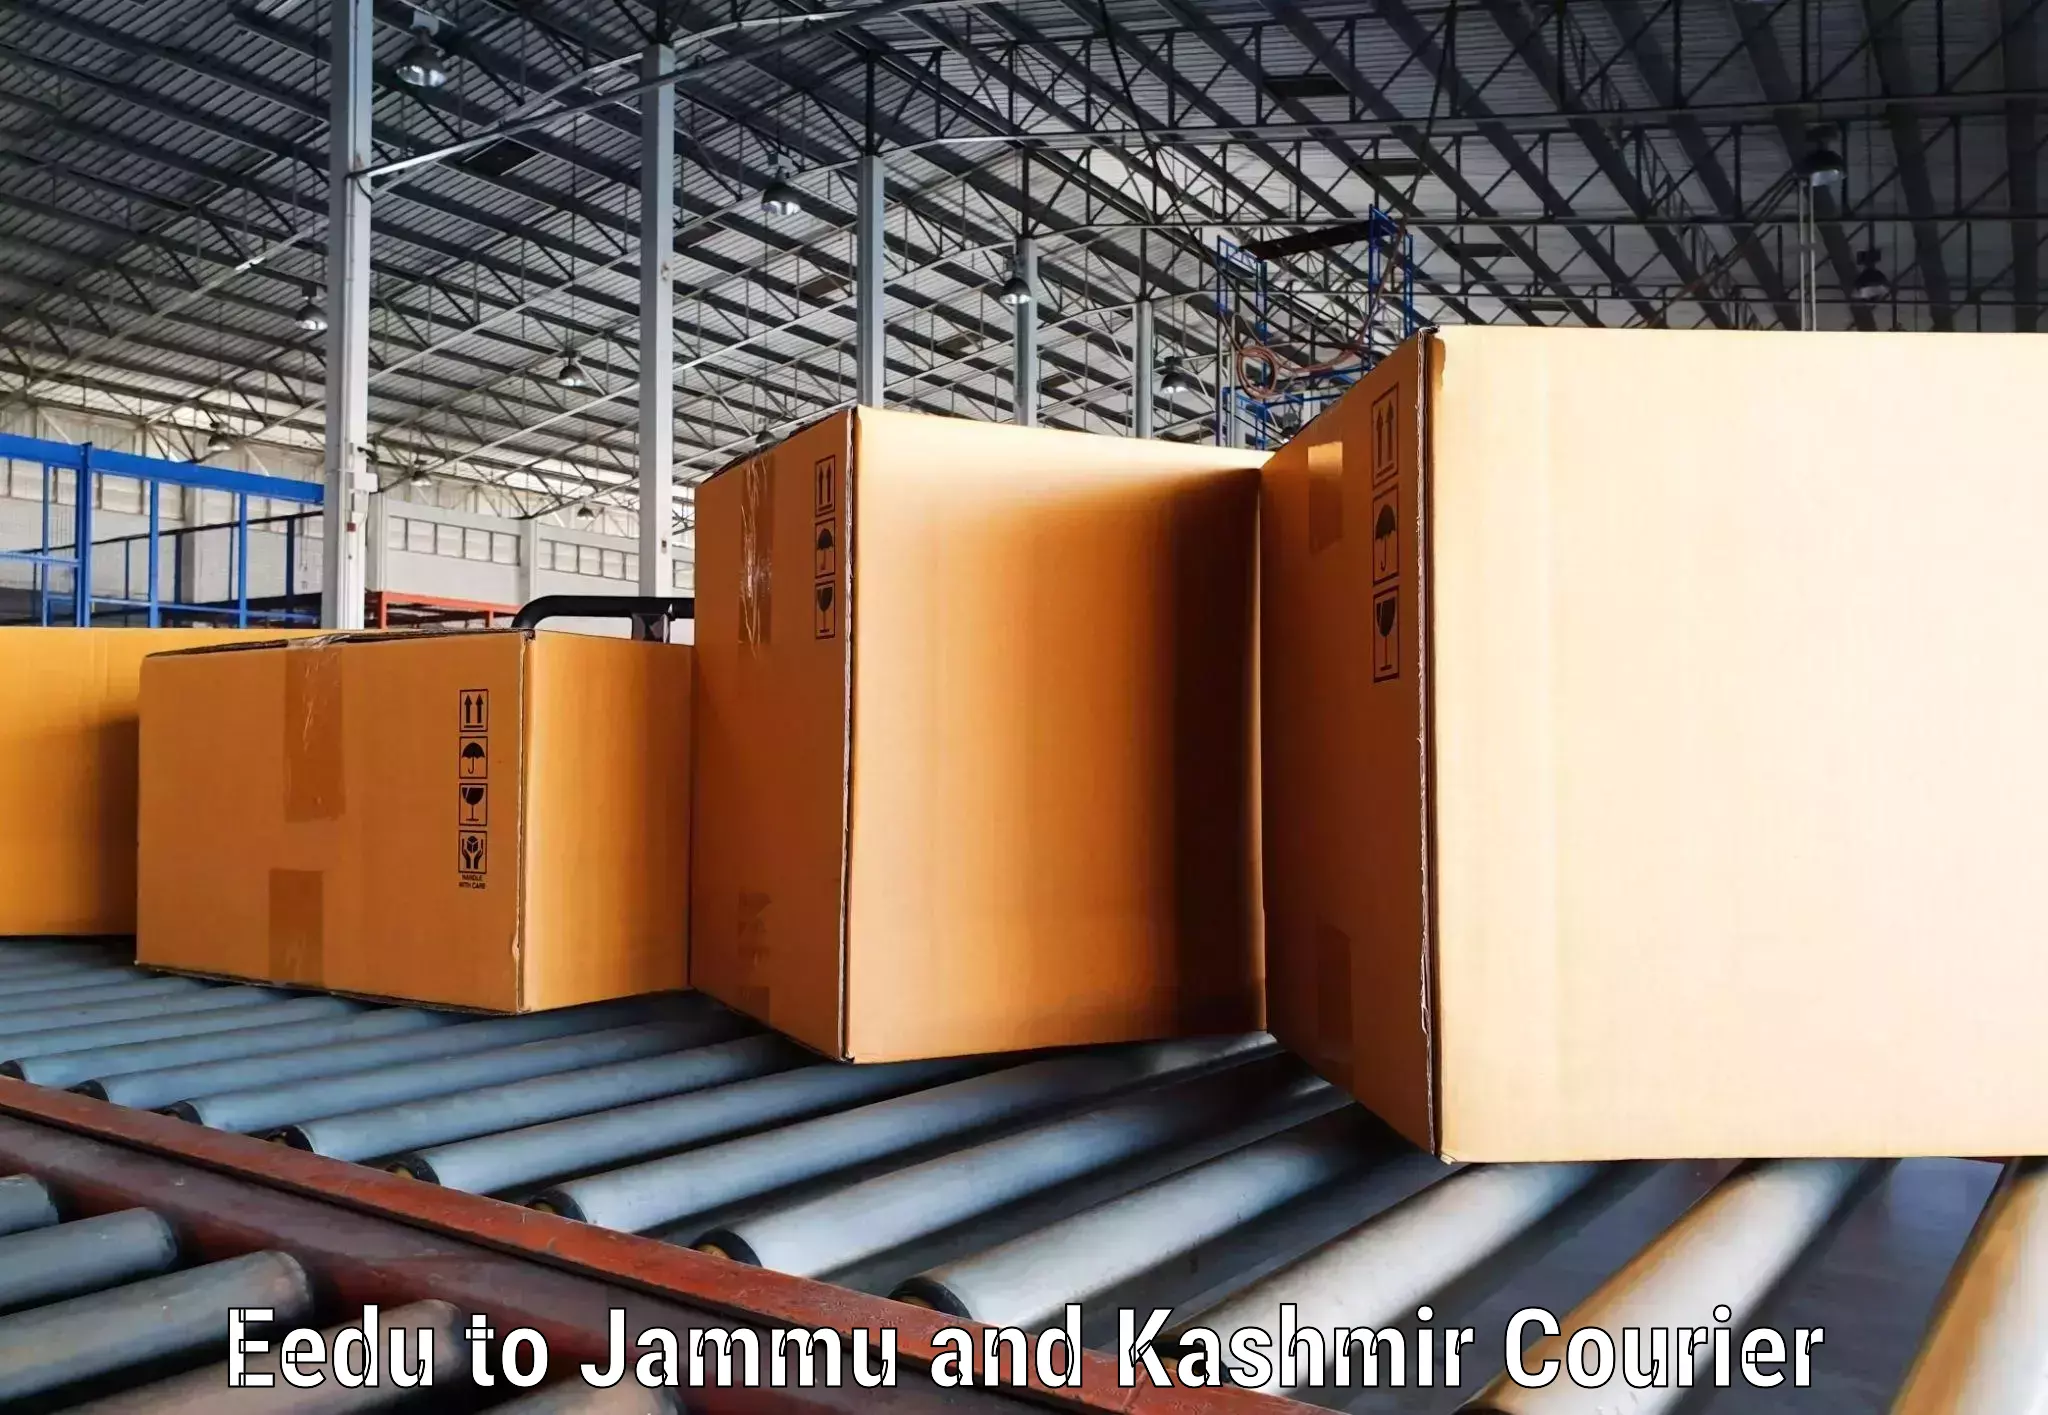 Track and trace shipping Eedu to Jammu and Kashmir